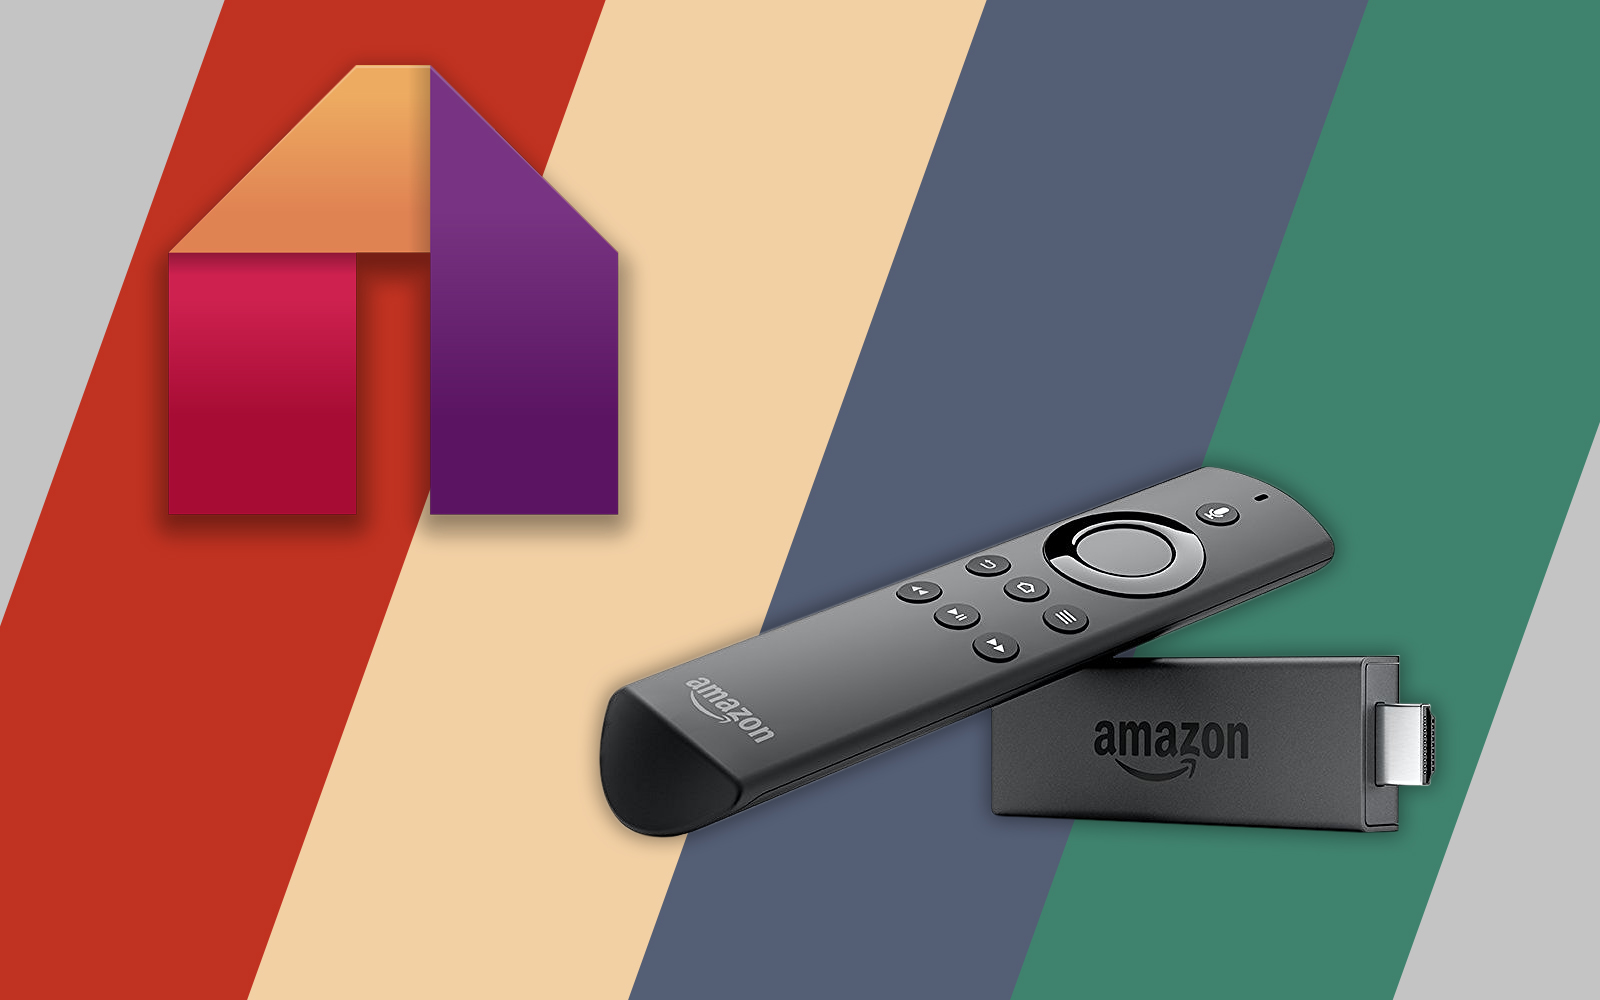 How To Install Mobdro on an Amazon FireStick TV